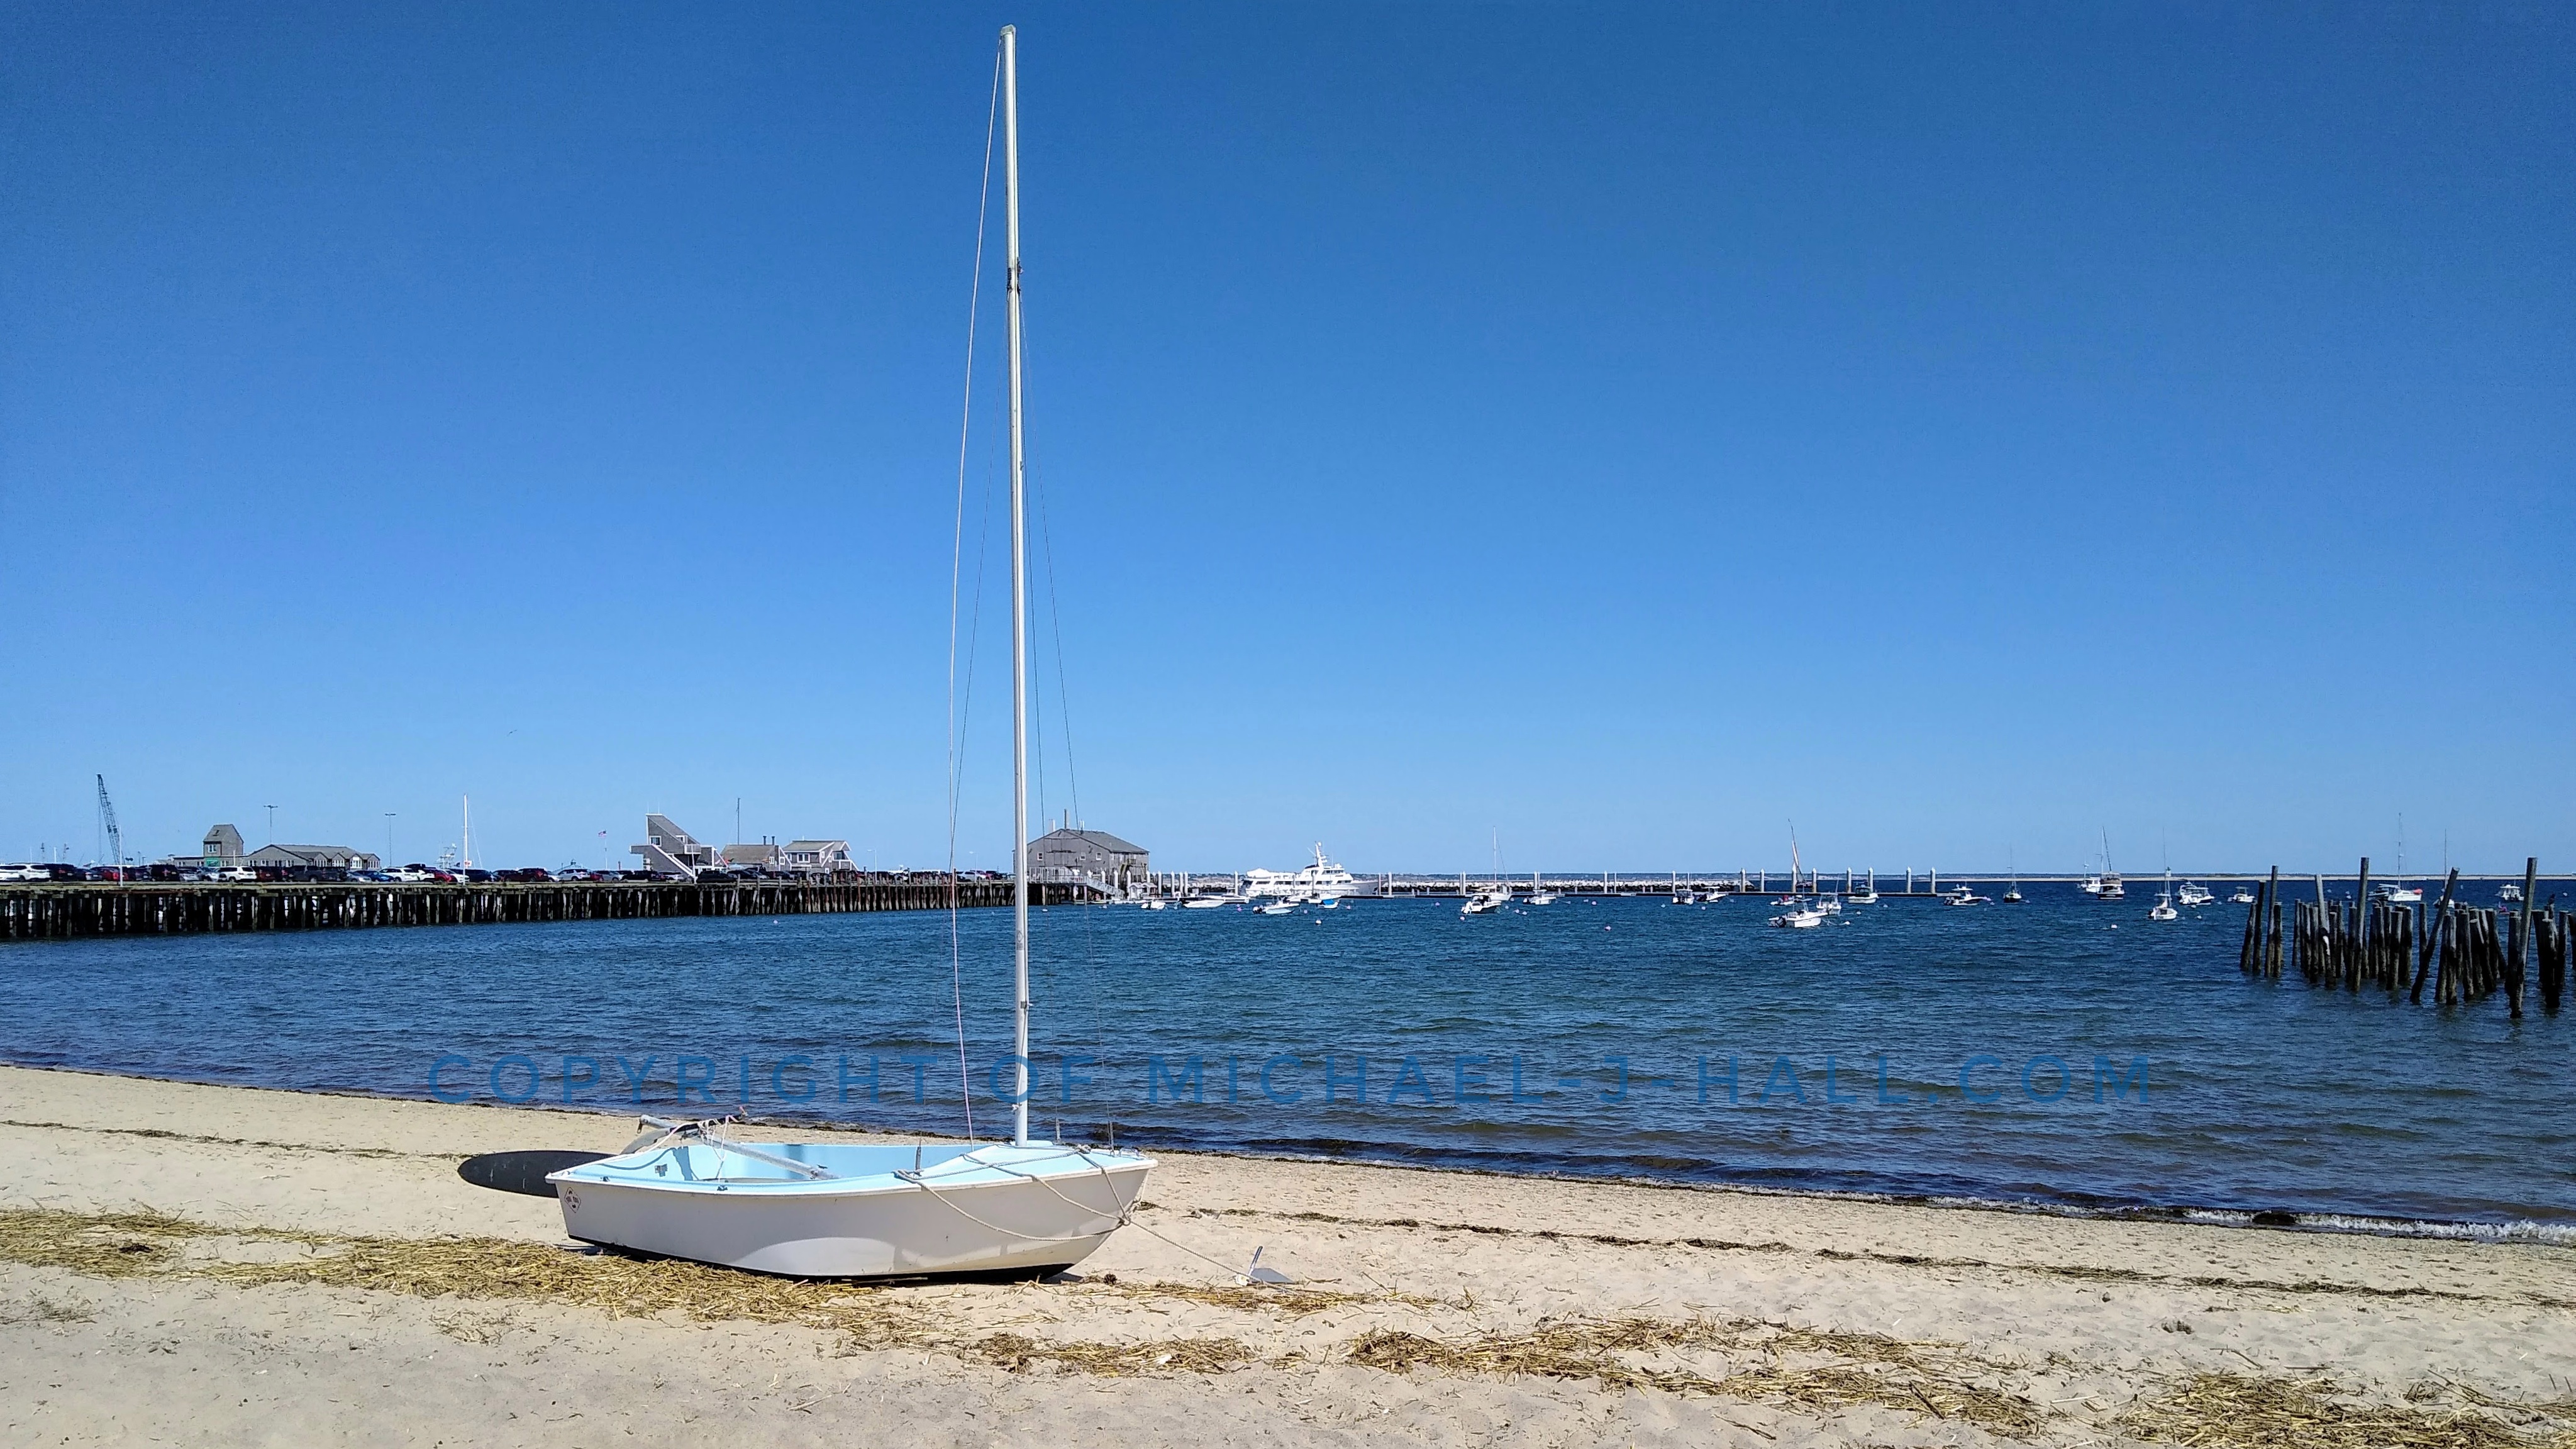 On this clear, cool day a masted skiff is anchored loosely in the sandy beach ready to bravely challenge the Provincetown bay whenever its owner returns for their next bold adventure with the wind and water together.